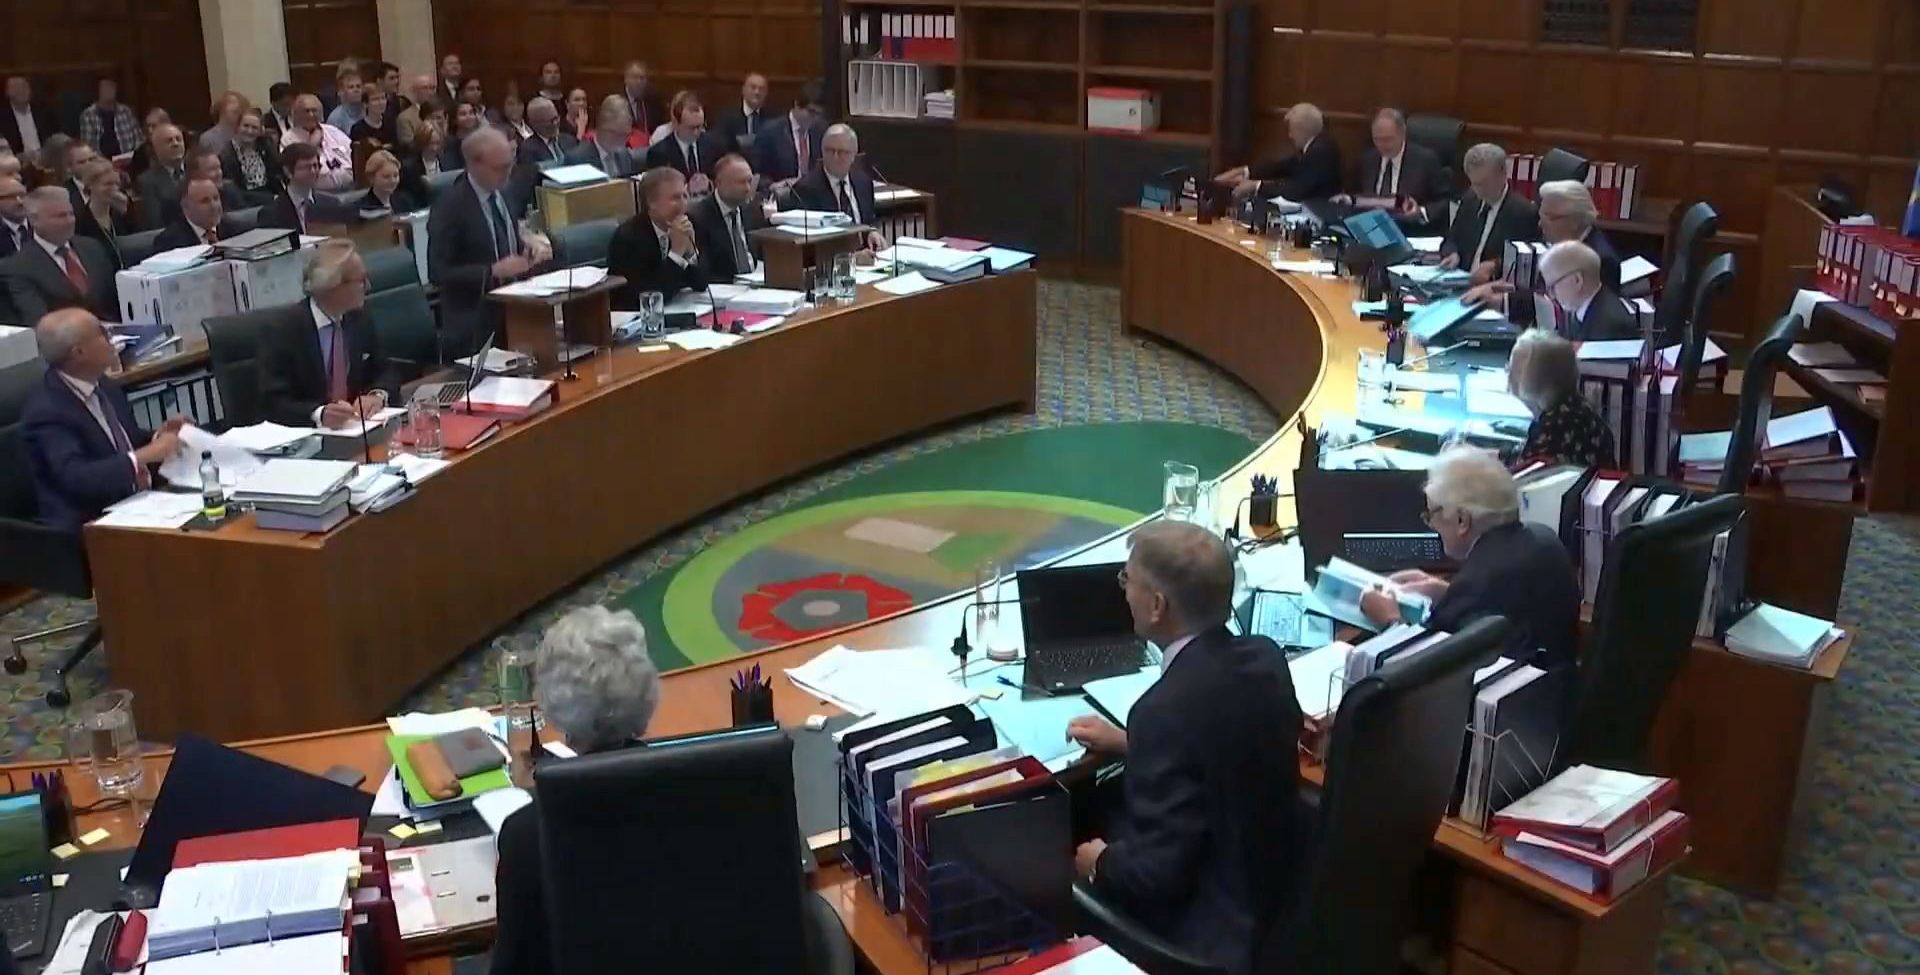 epa07852885 A handout screengrab made available by the Supreme Court of the United Kingdom shows court proceedings on the third day of a hearing on the prorogation of British parliament, in London, Britain, 19 September 2019. The Supreme Court is to decided whether the suspension of parliament by British Prime Minister Boris Johnson was lawful.  EPA/SUPREME COURT / HANDOUT HANDOUT MANDATORY CREDIT: CROWN COPYRIGHT HANDOUT EDITORIAL USE ONLY/NO SALES